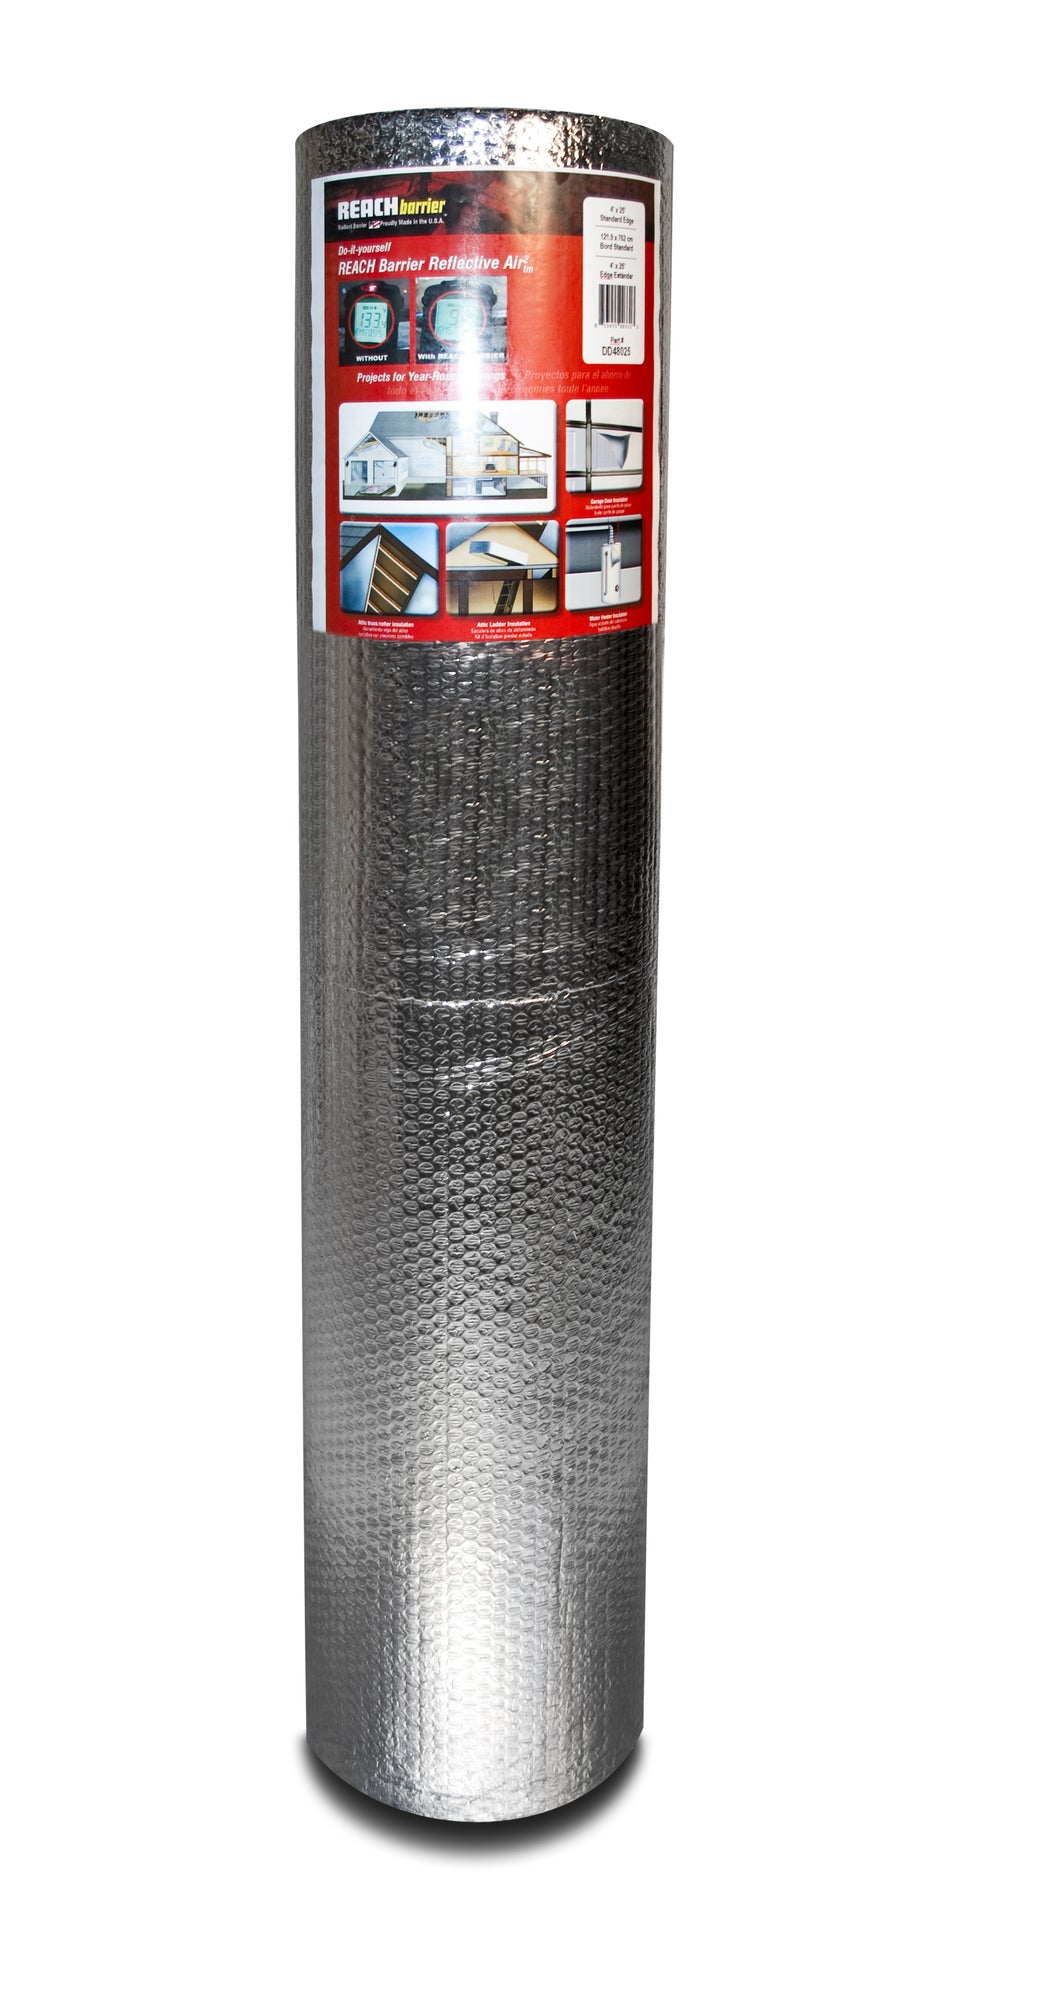 Reach Barrier Reflective Air² Roll 4'x25' (Double Reflective/Double Bubble)